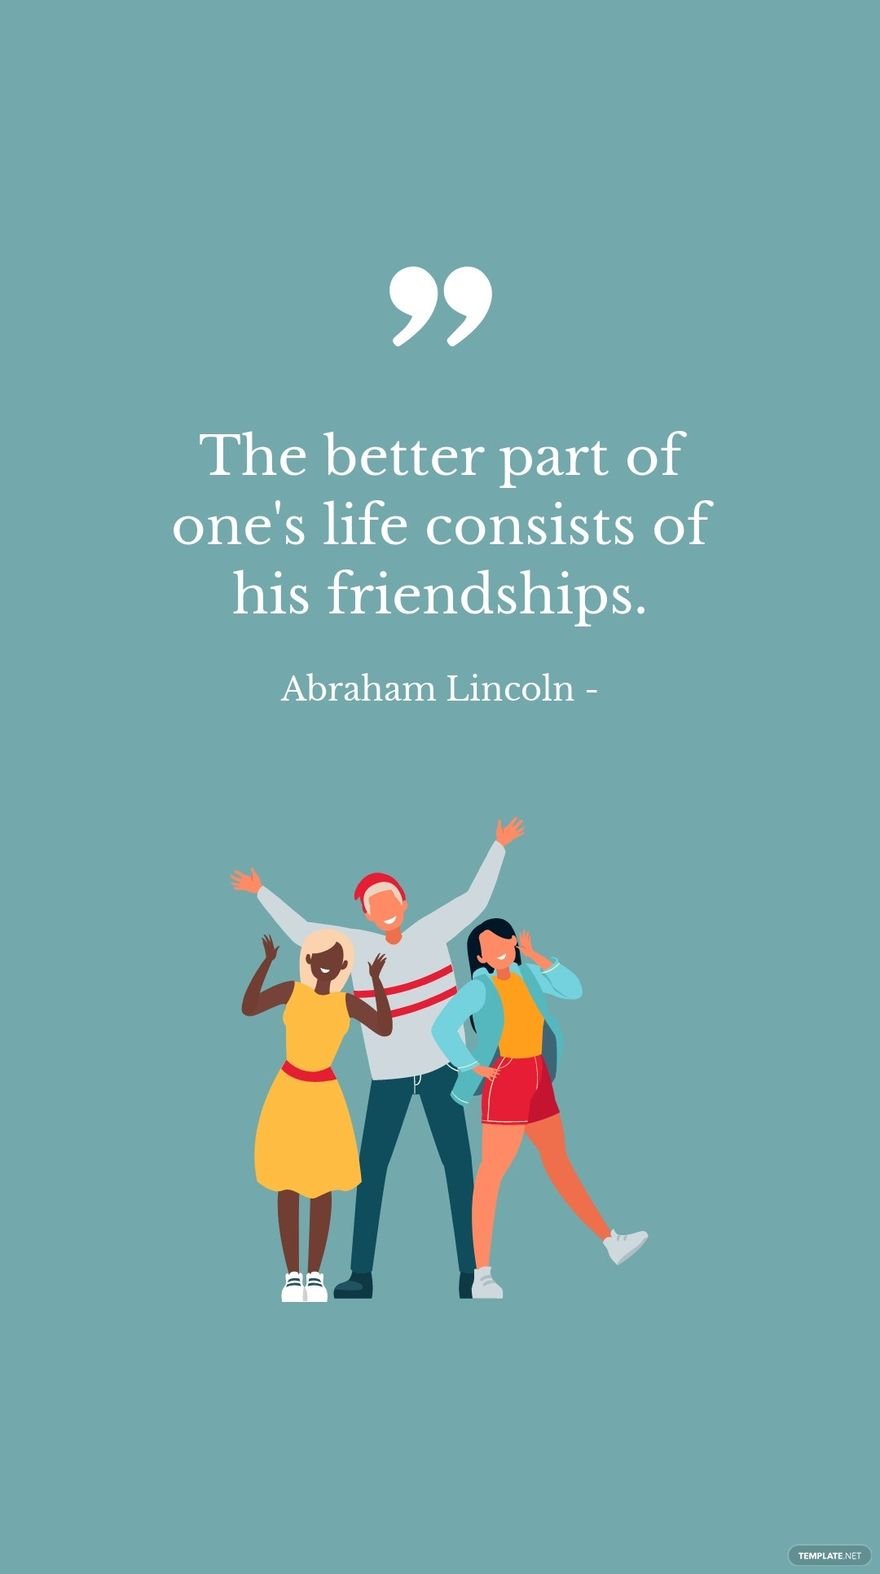 Abraham Lincoln - The better part of one's life consists of his friendships.